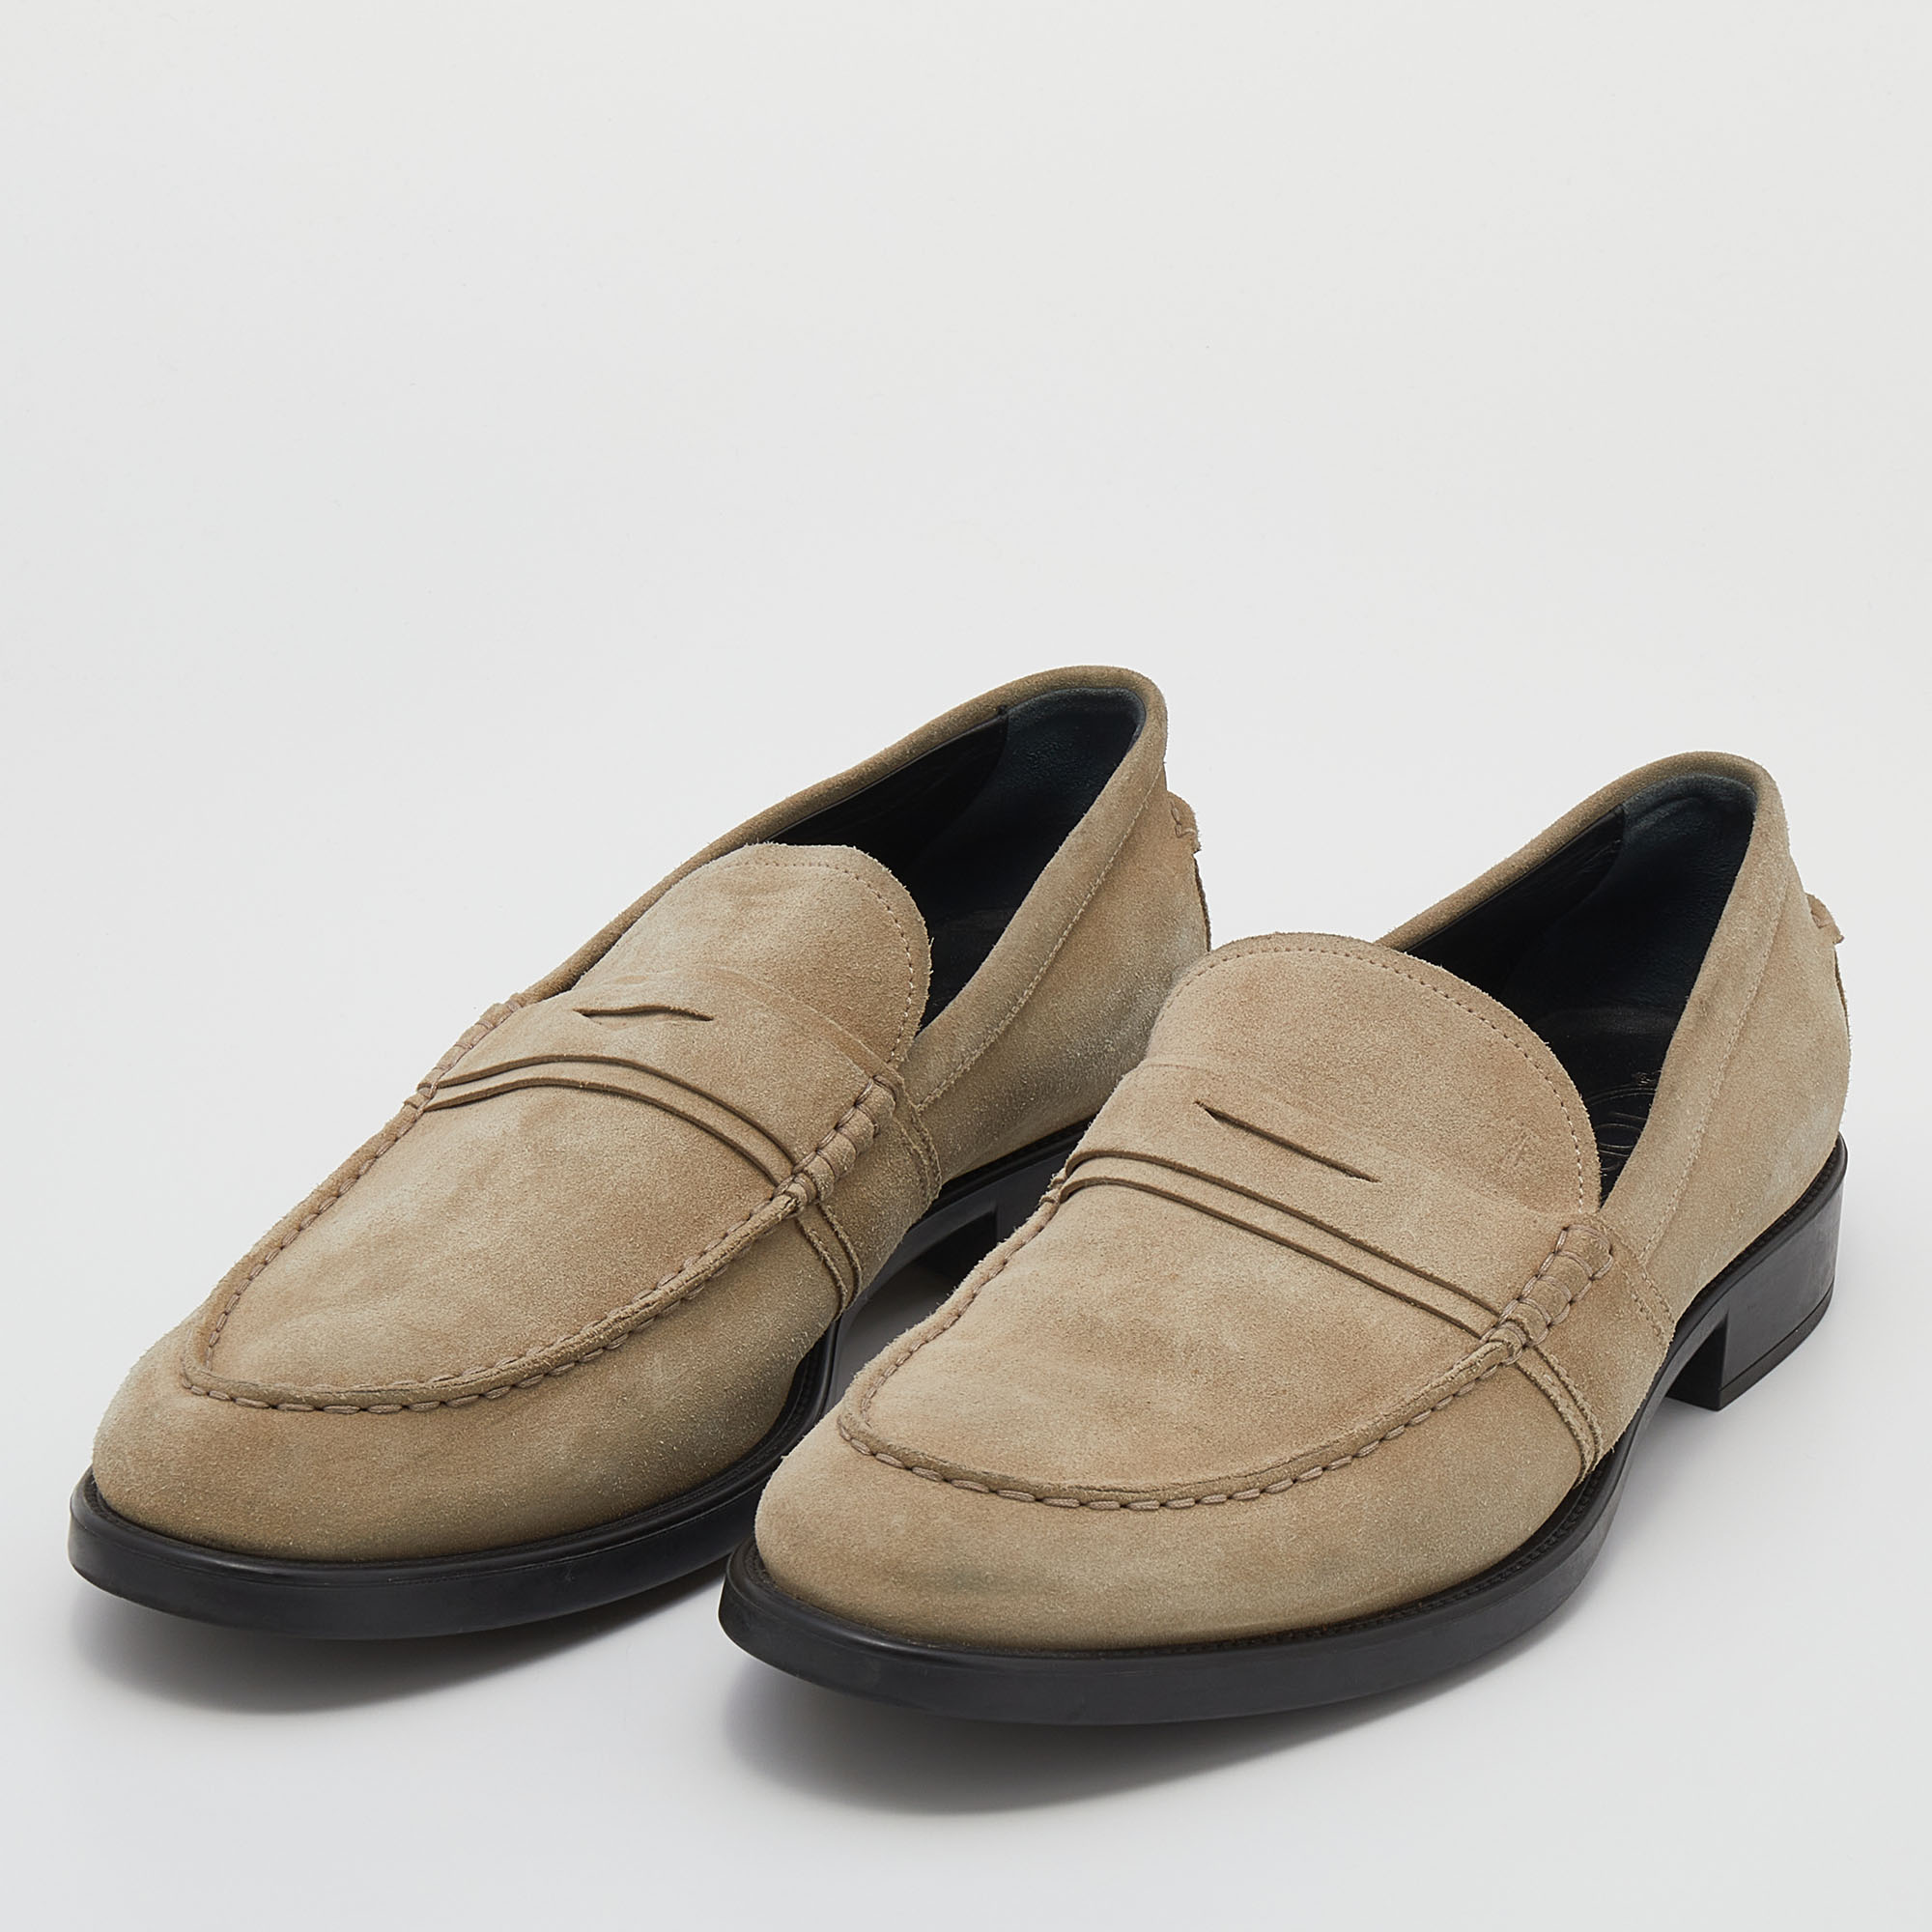 

Tod's Khaki Beige Suede Slip On Loafers Size